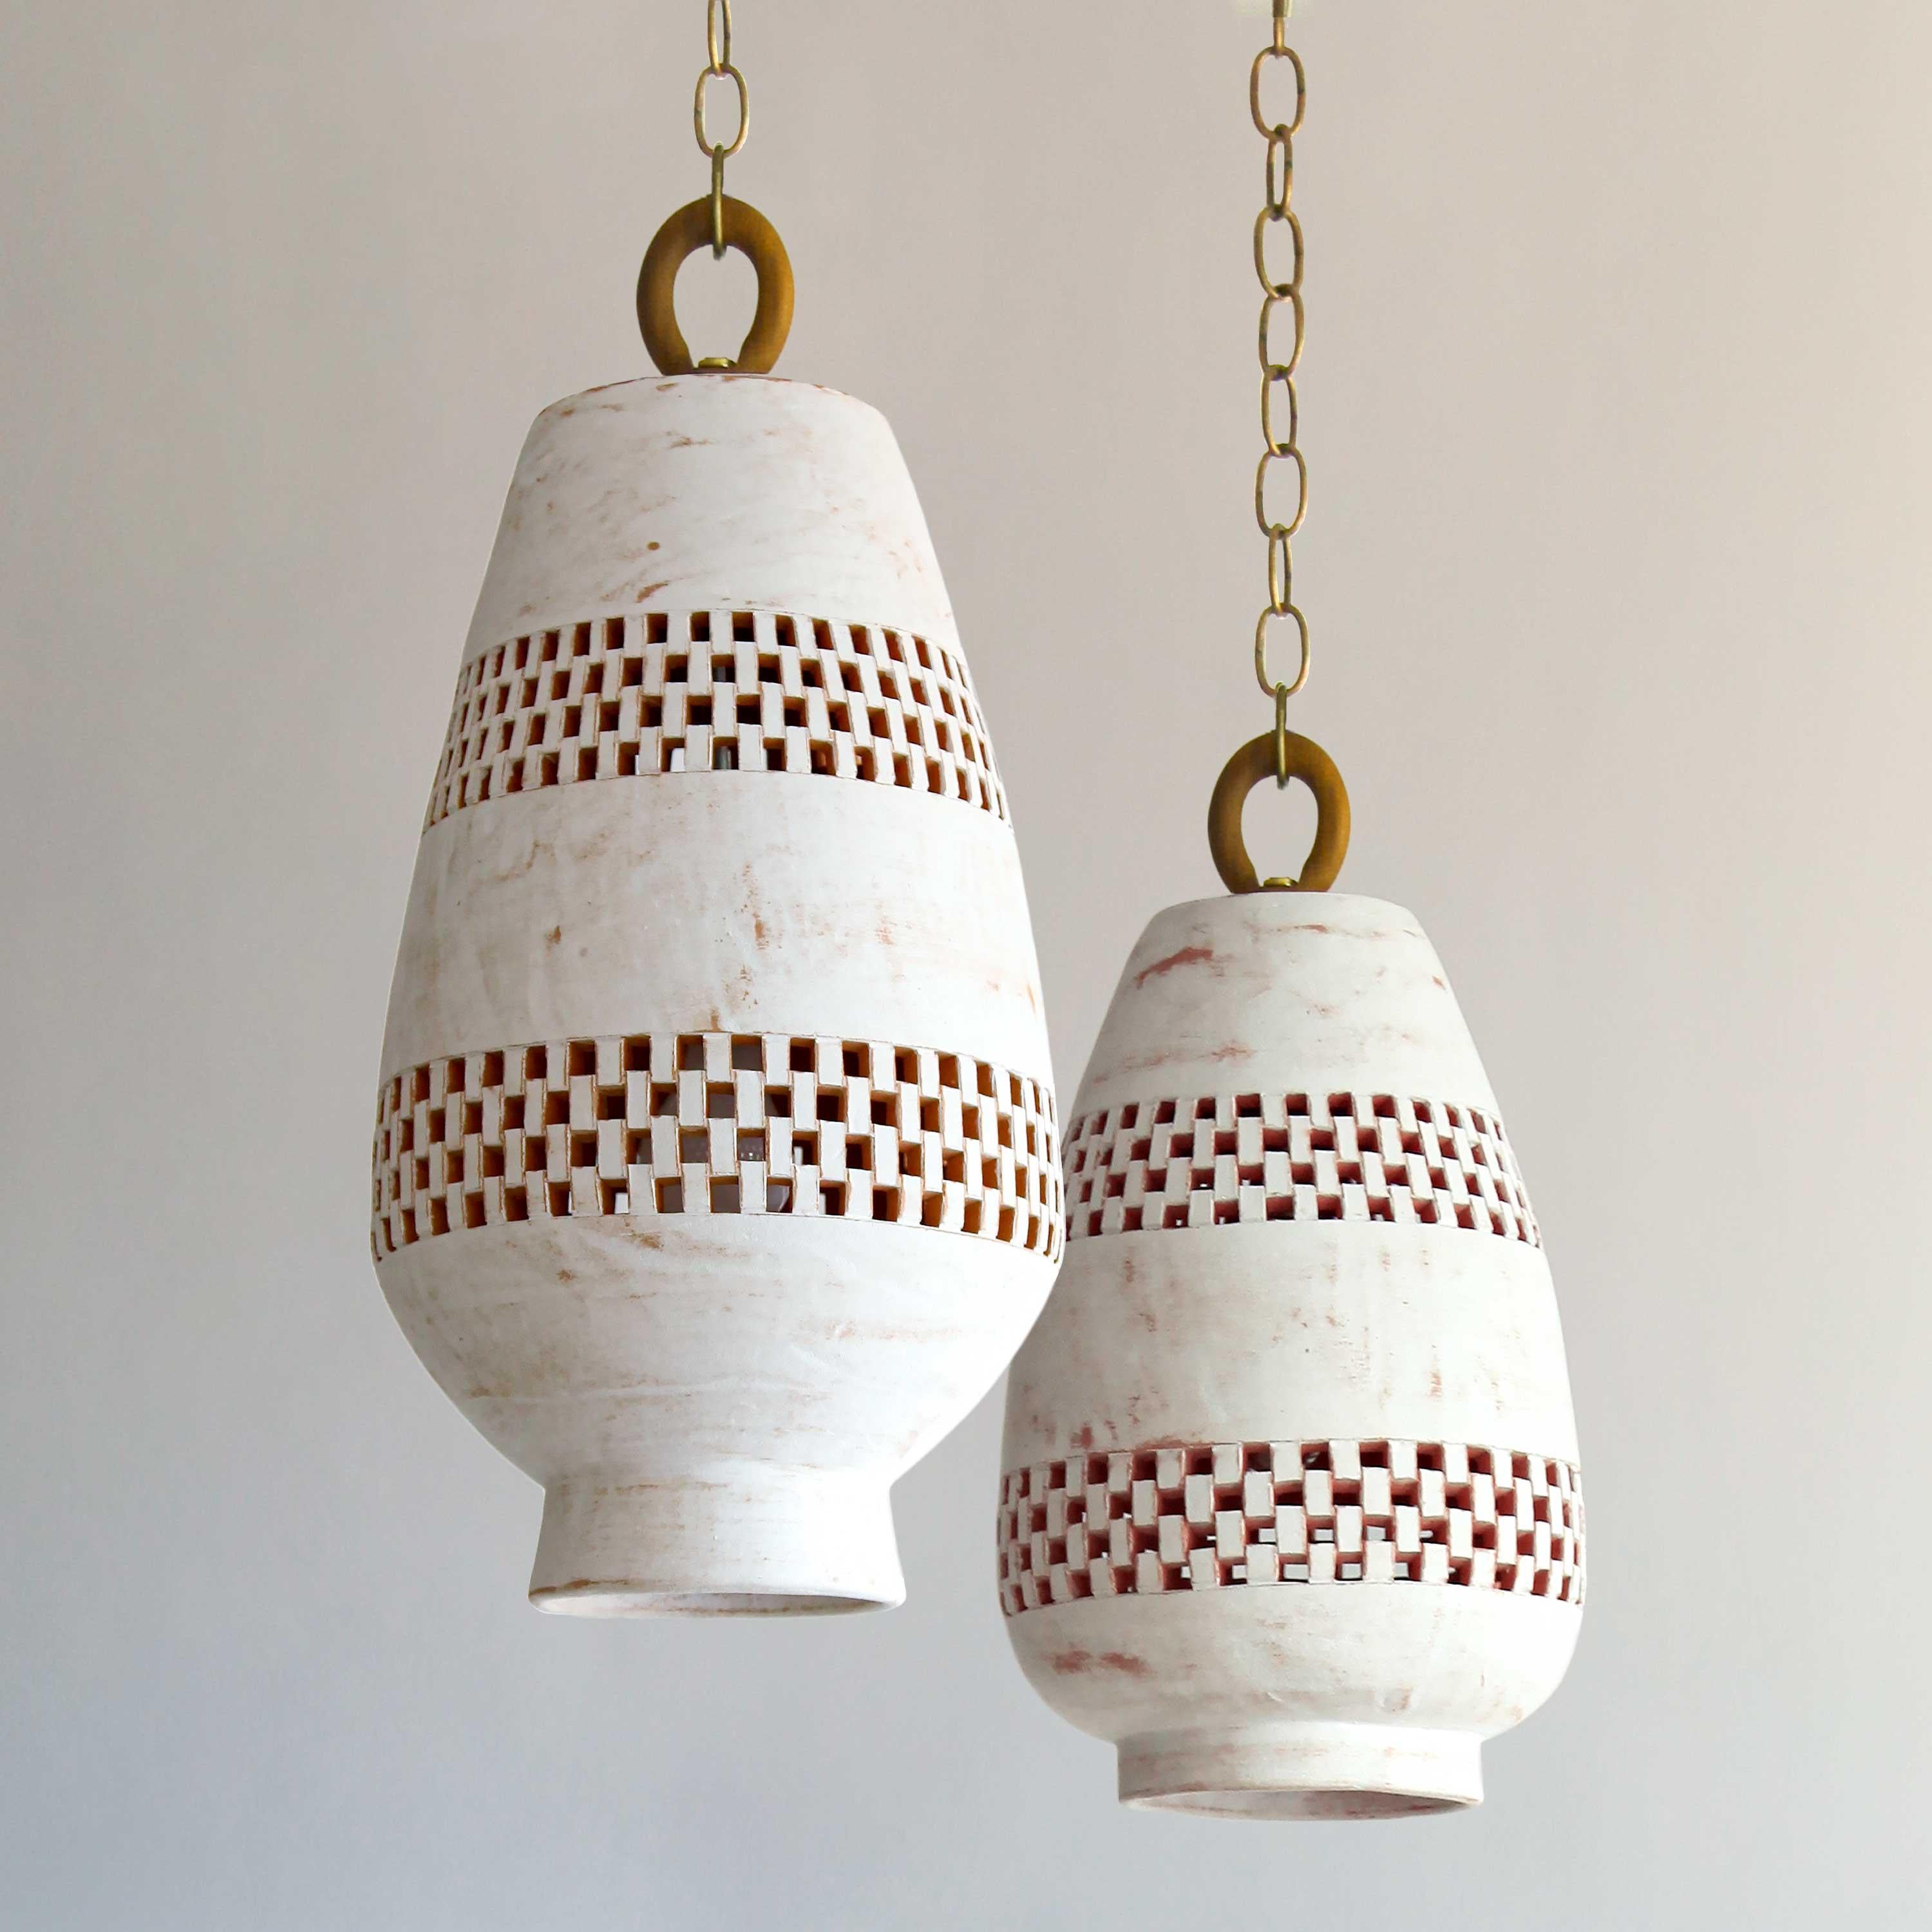 Mid-Century Modern Small White Ceramic Pendant Light, Natural Brass, Ajedrez Atzompa Collection For Sale